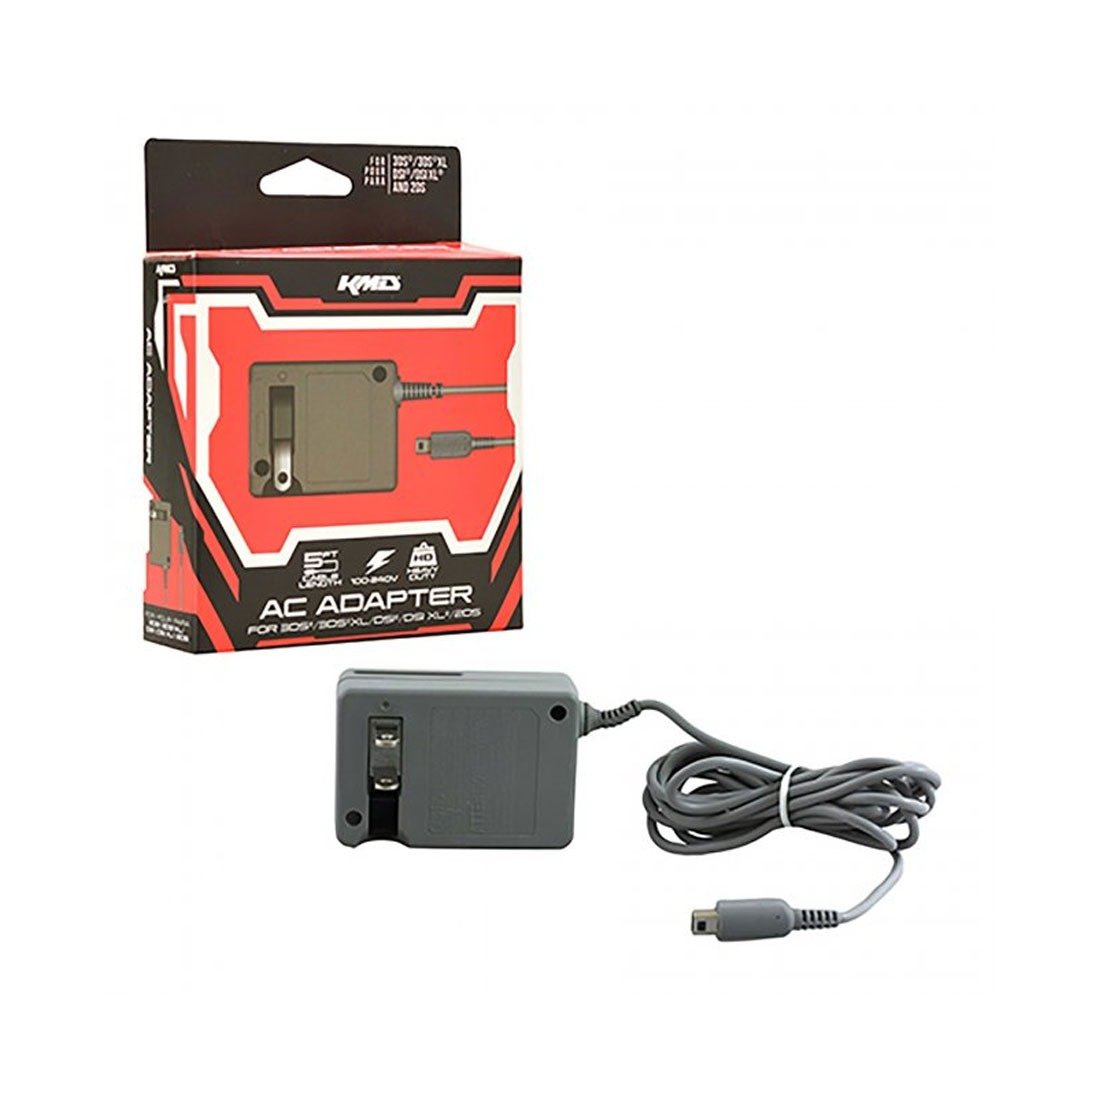 3DS AC ADAPTER KMD